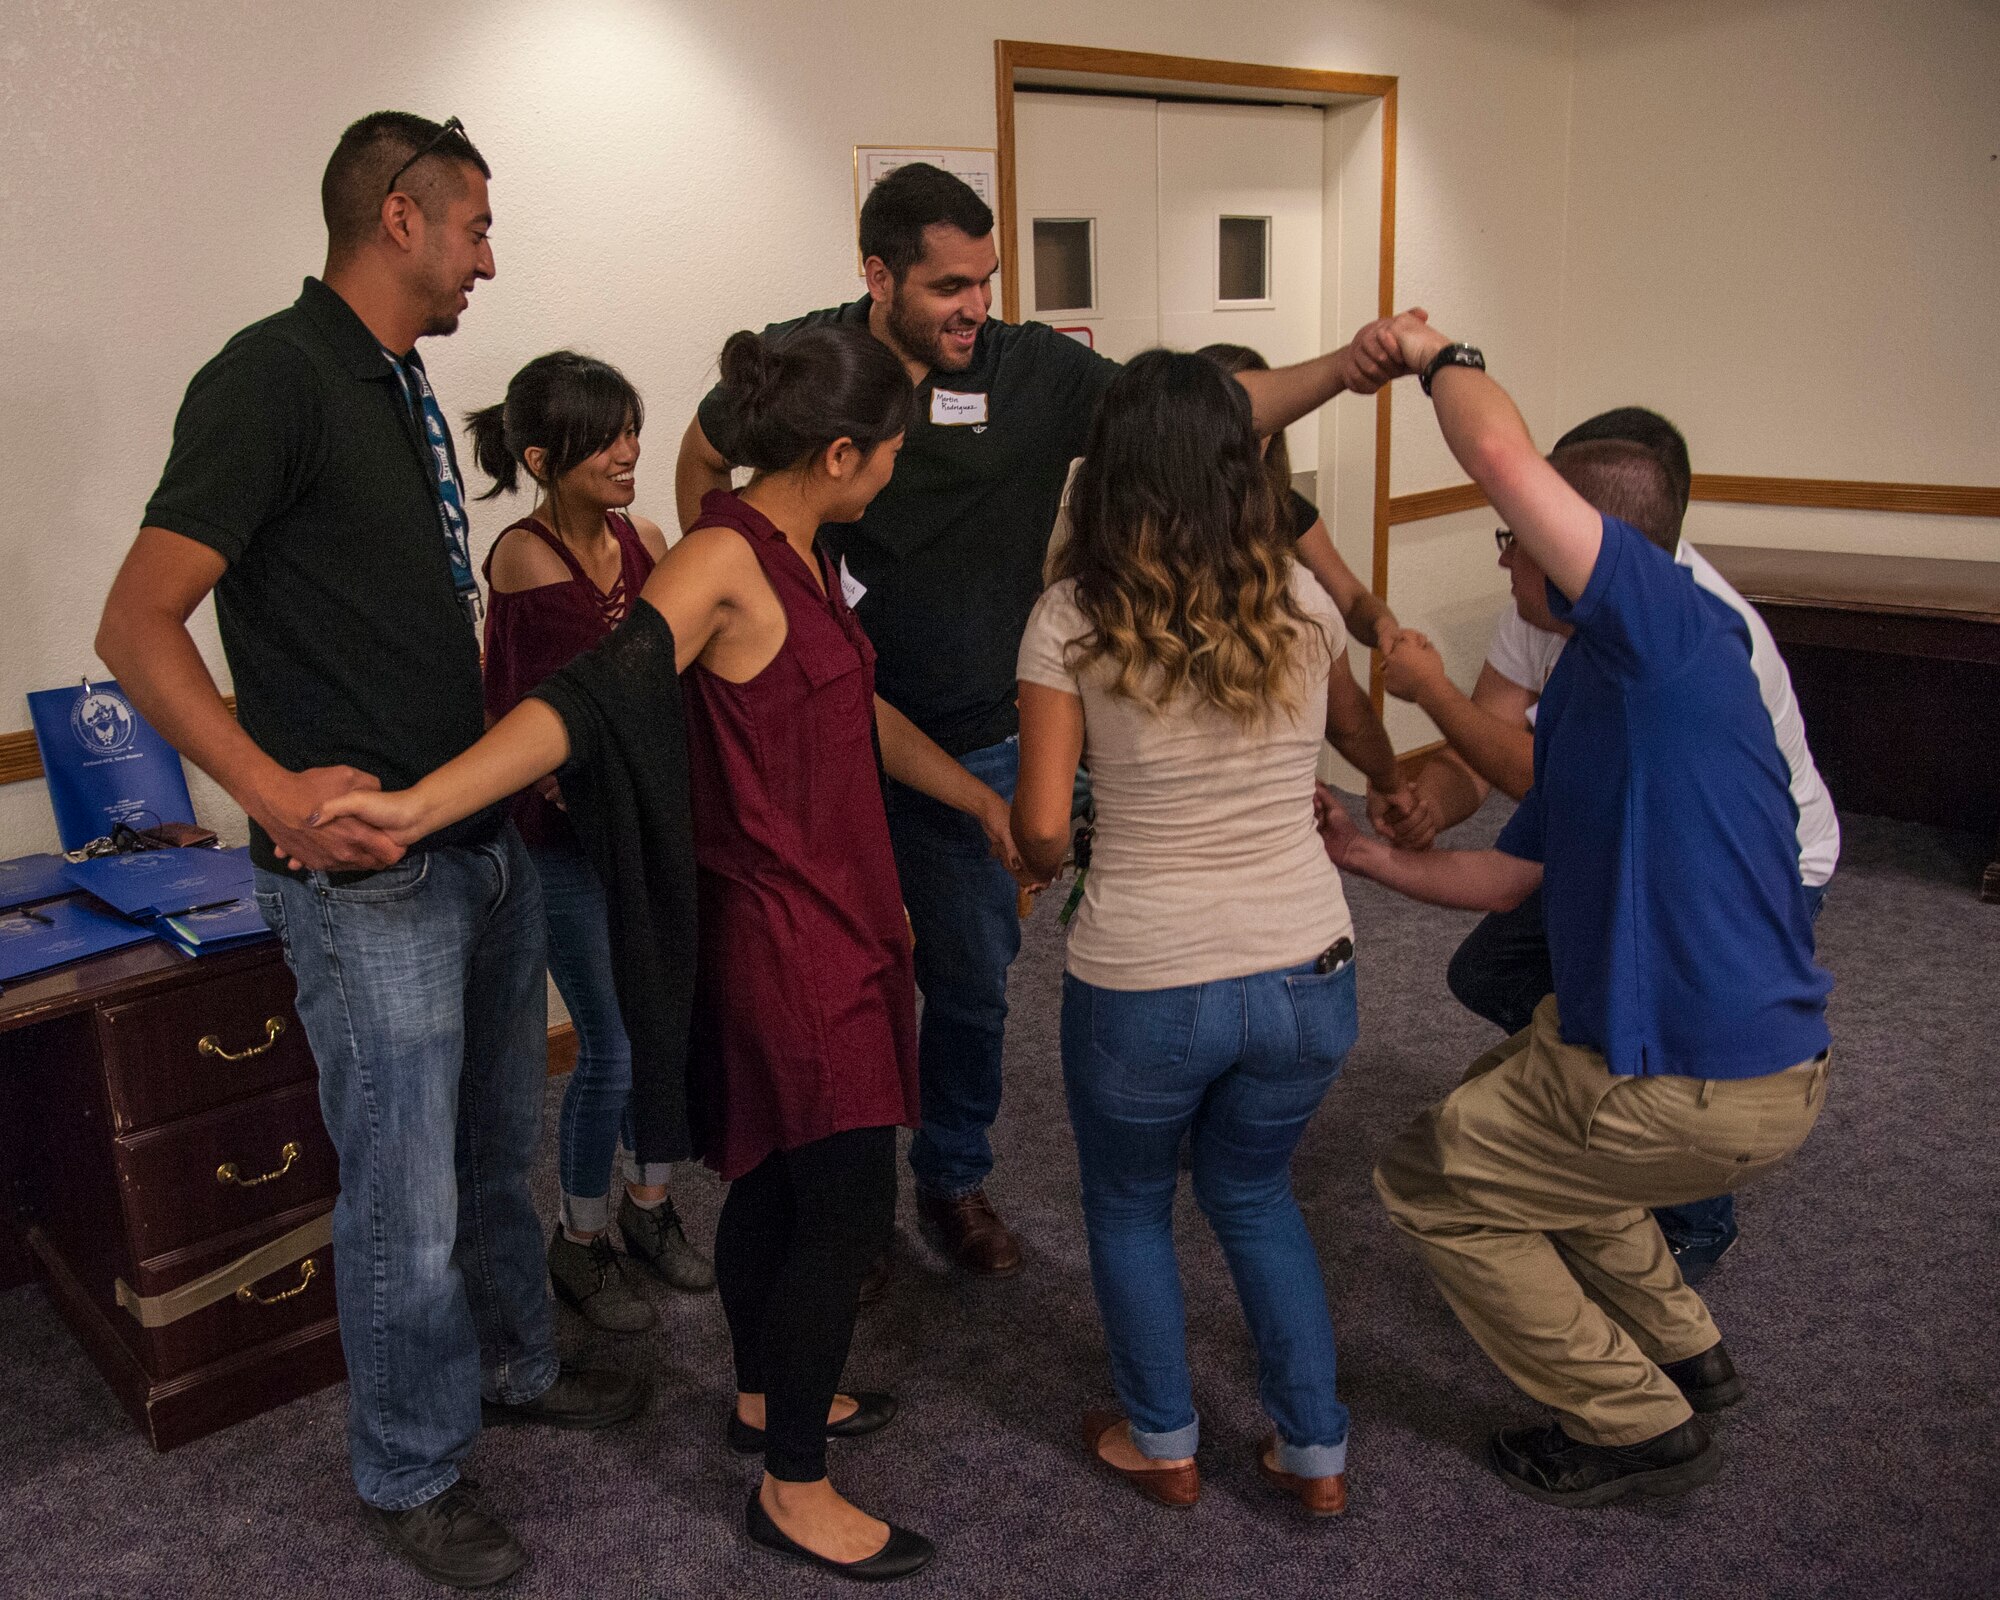 Interns at Team Kirtland units, including the Air Force Nuclear Weapons Center, Air Force Operational Test and Evaluation Center, and the 377 Air Base Wing do a team-building exercise dubbed "the human knot" June 15 here. (Air Force photo by Jim Fisher)